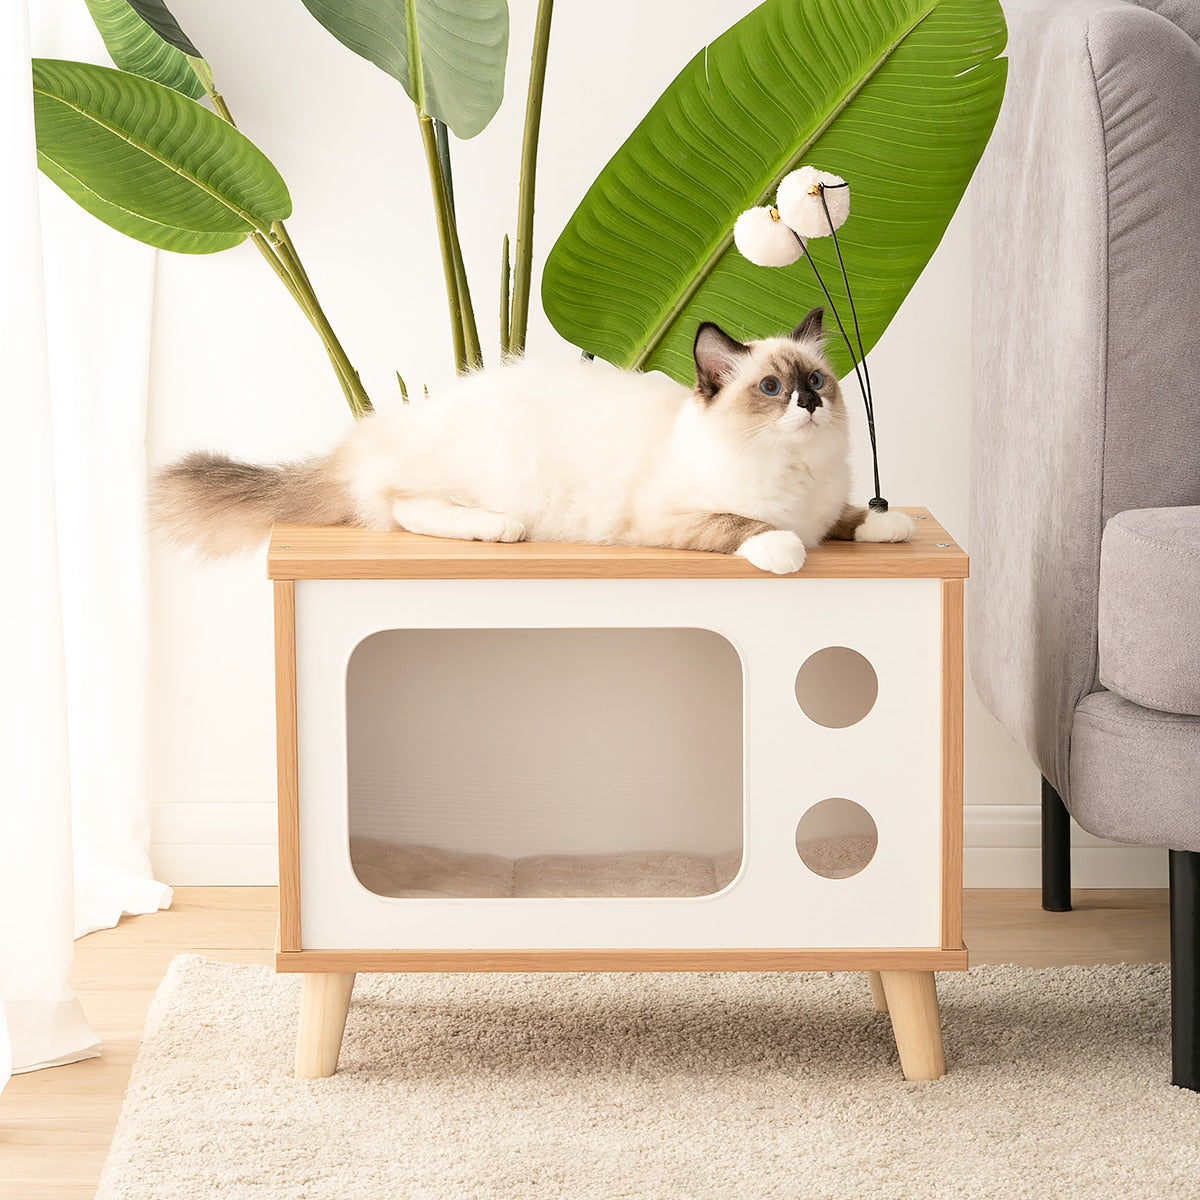 Pay-Purr View TV Cat Condo